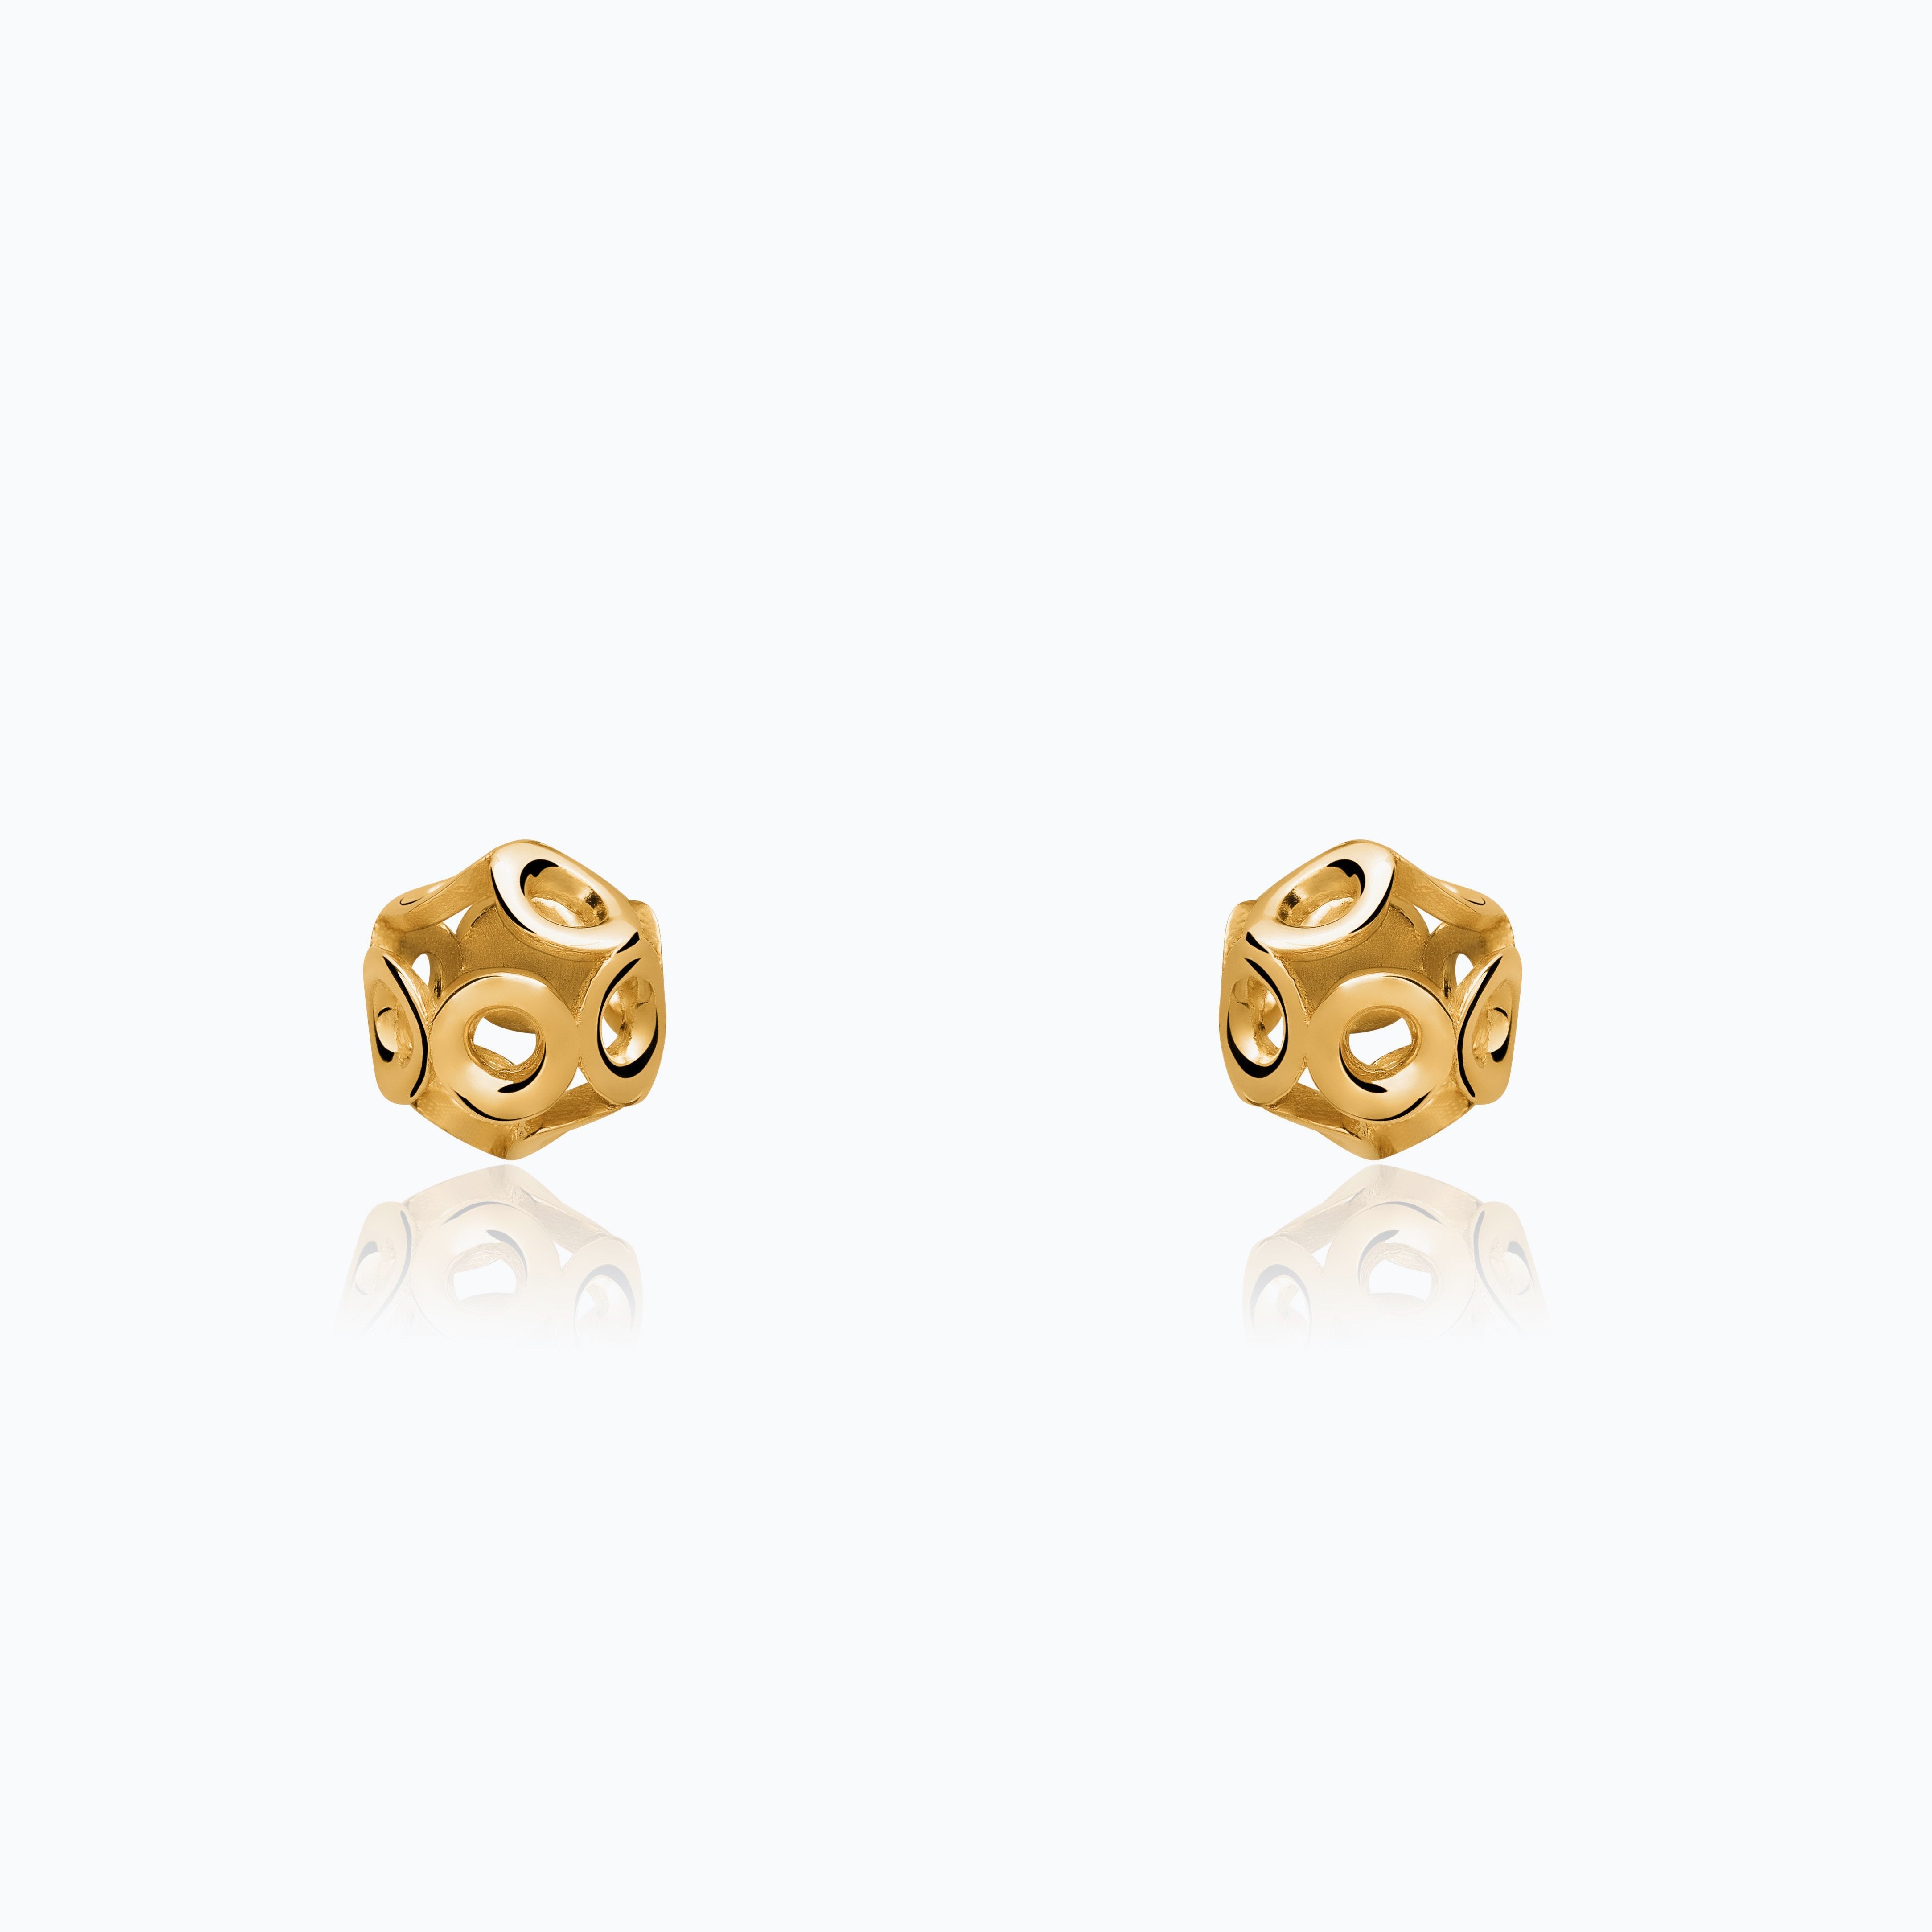 VOLCANO ROUND GOLD EARRINGS